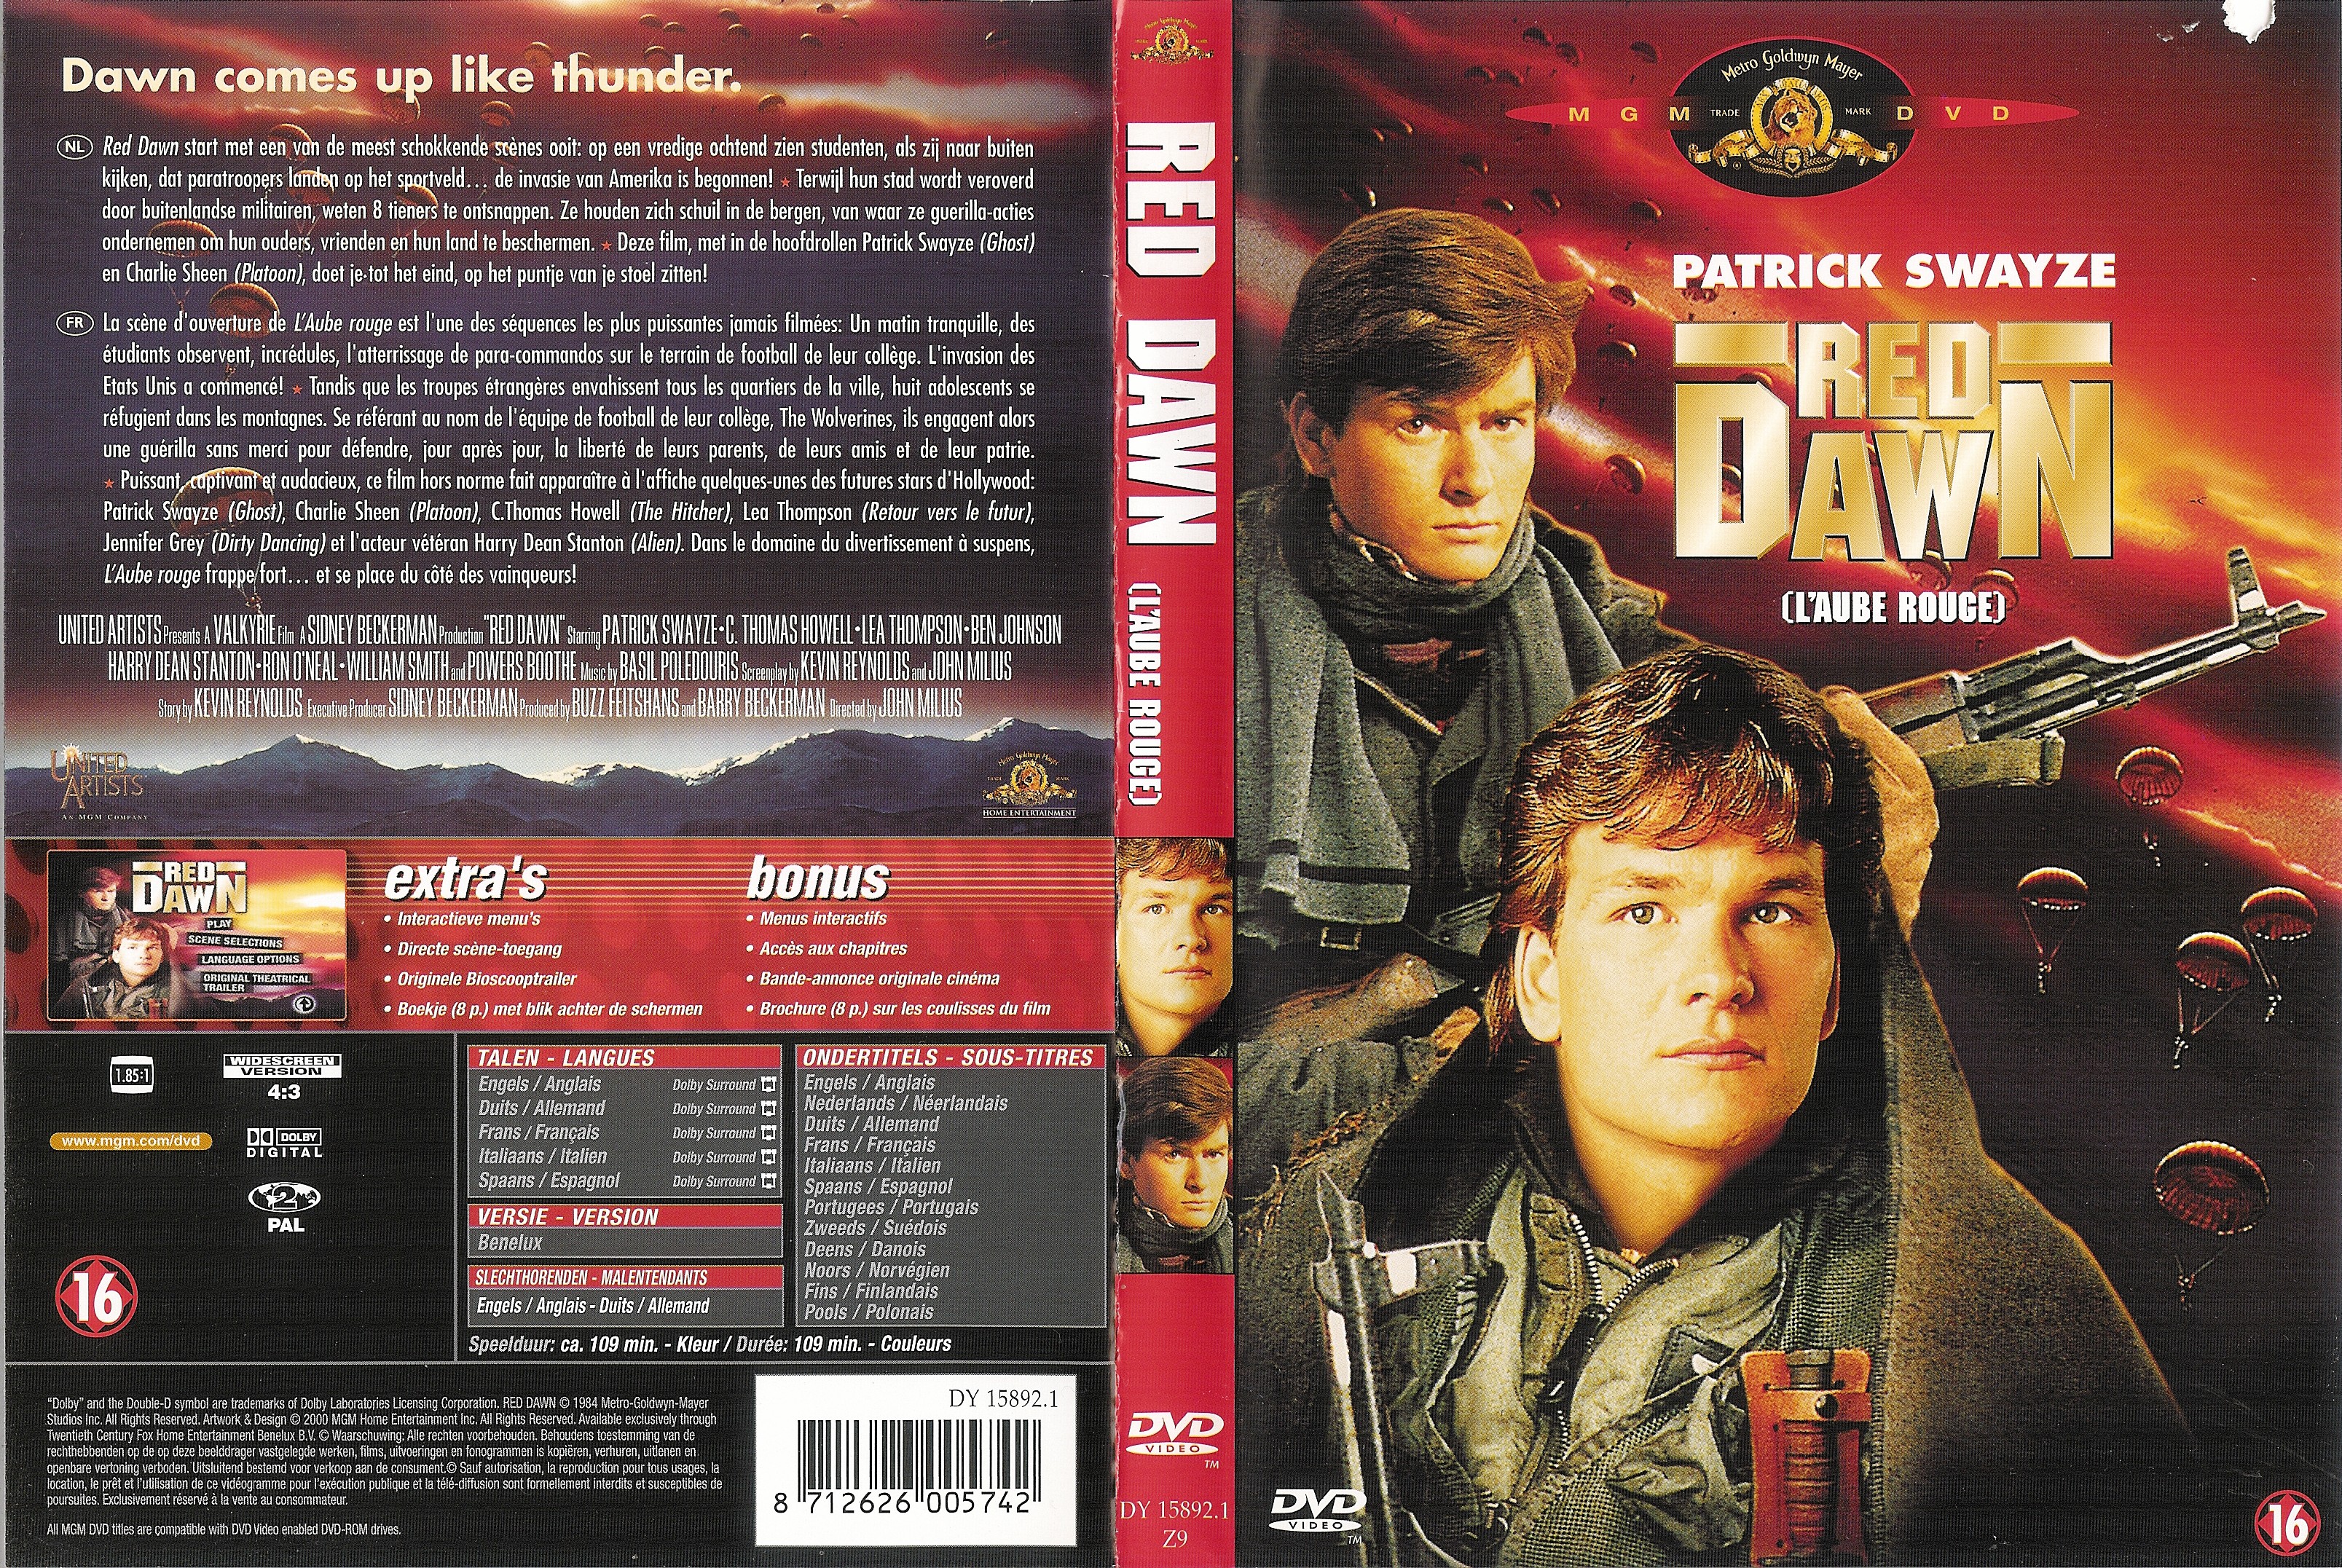 Jaquette DVD Red dawn